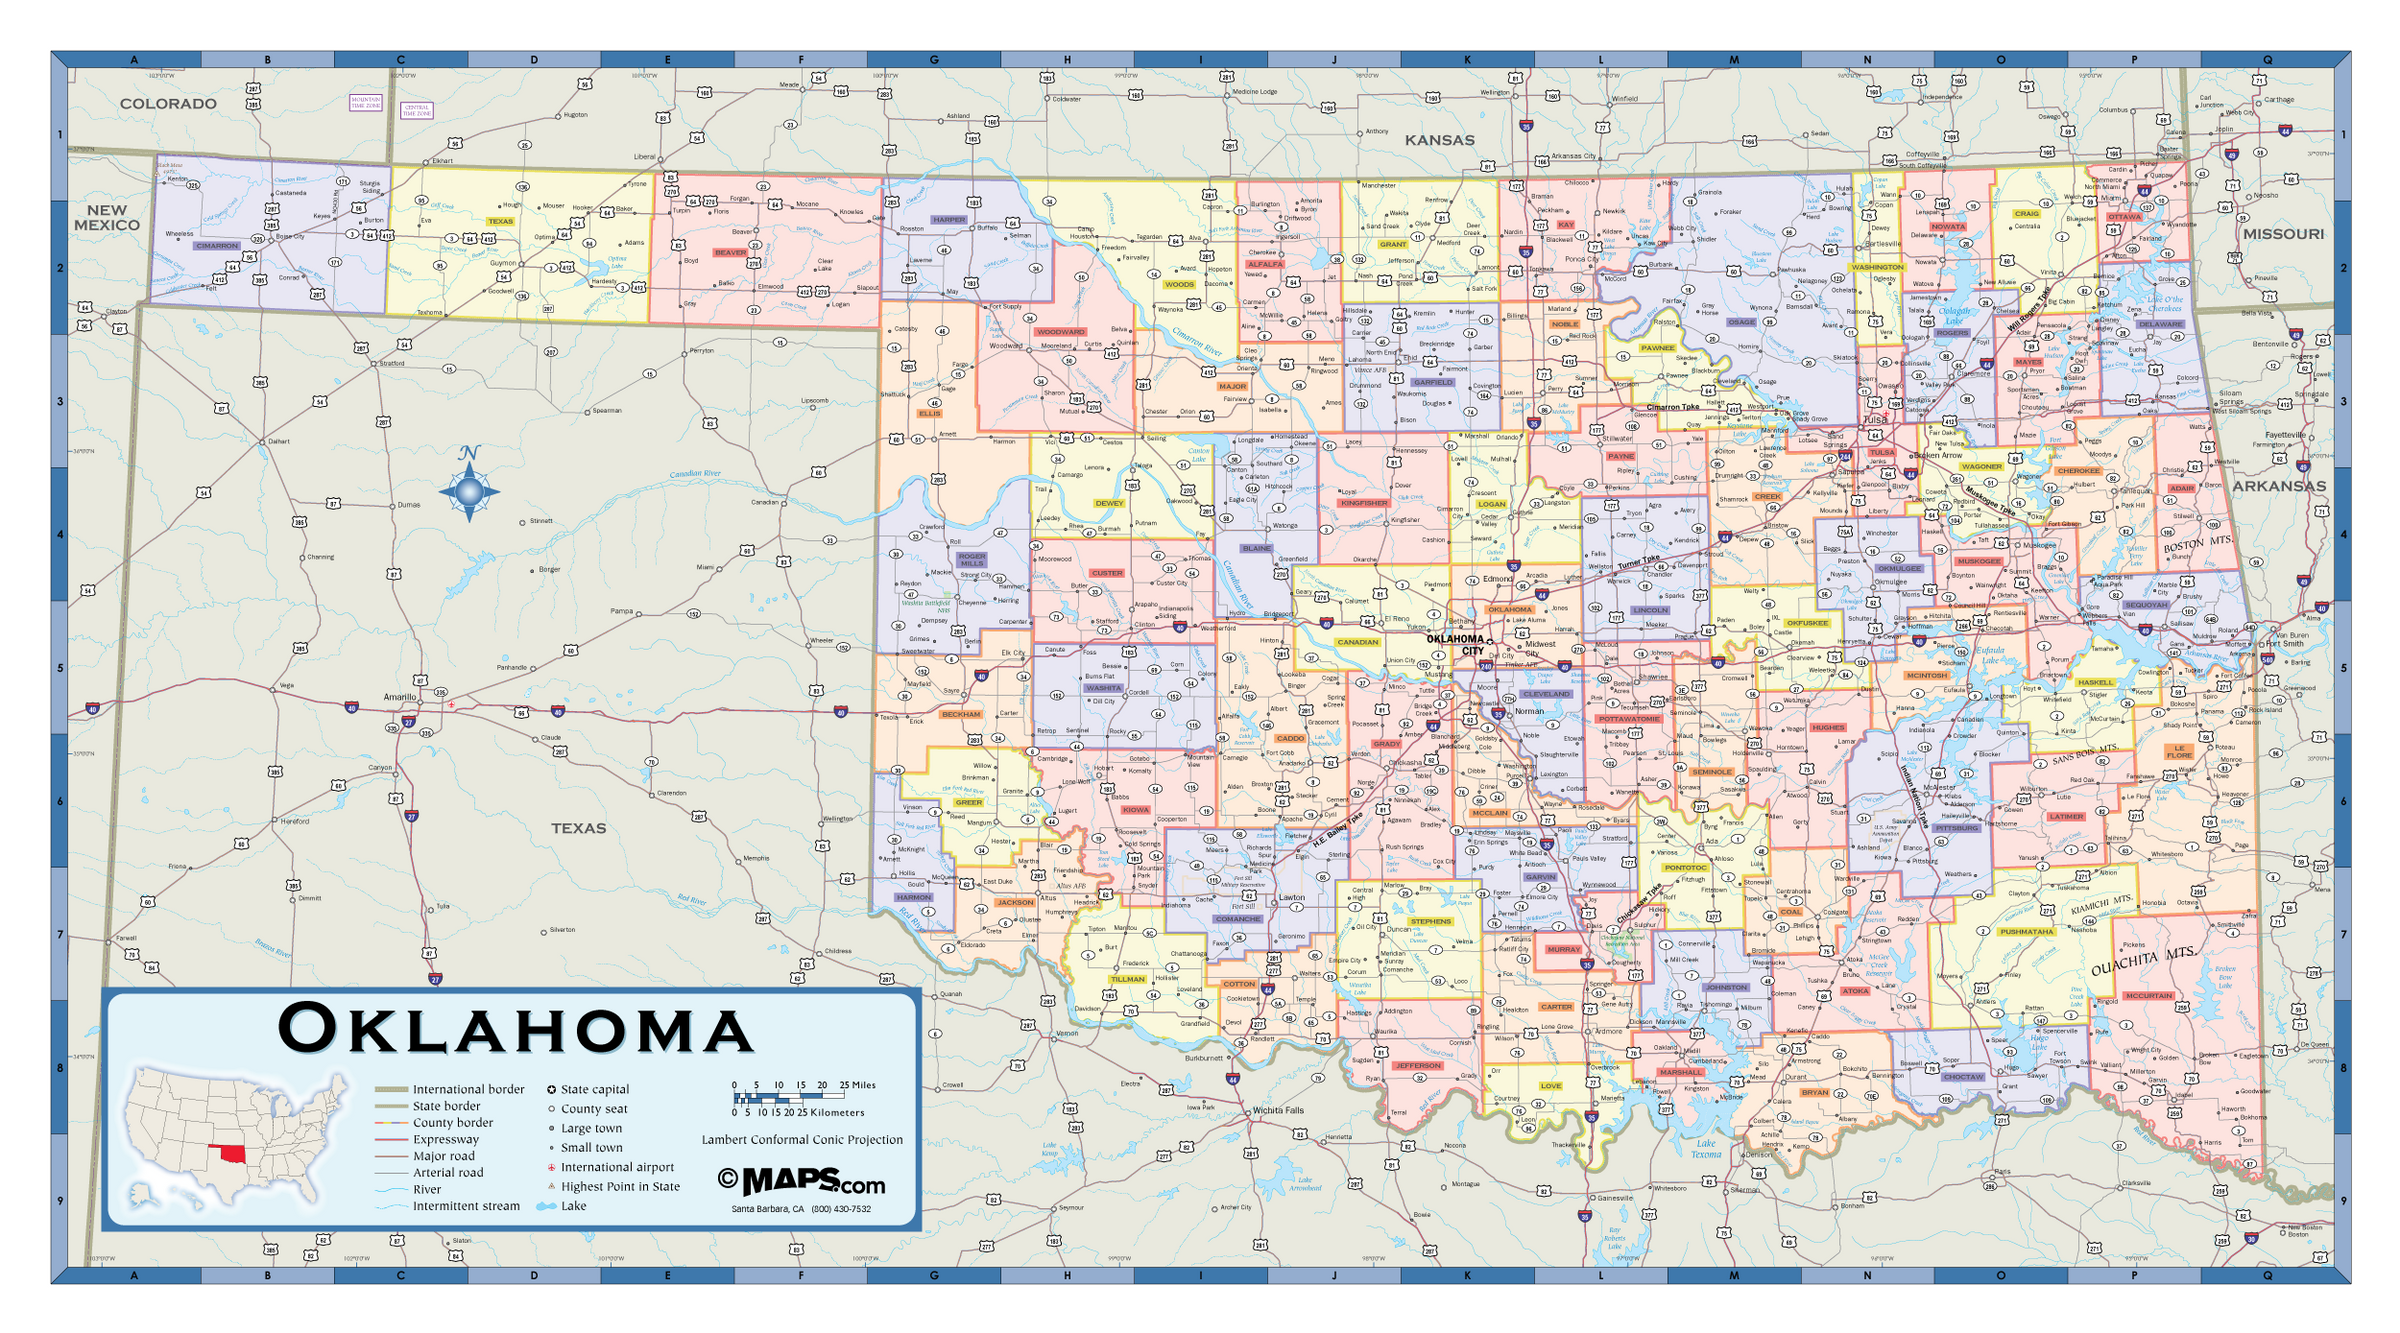 Oklahoma Map Showing Counties